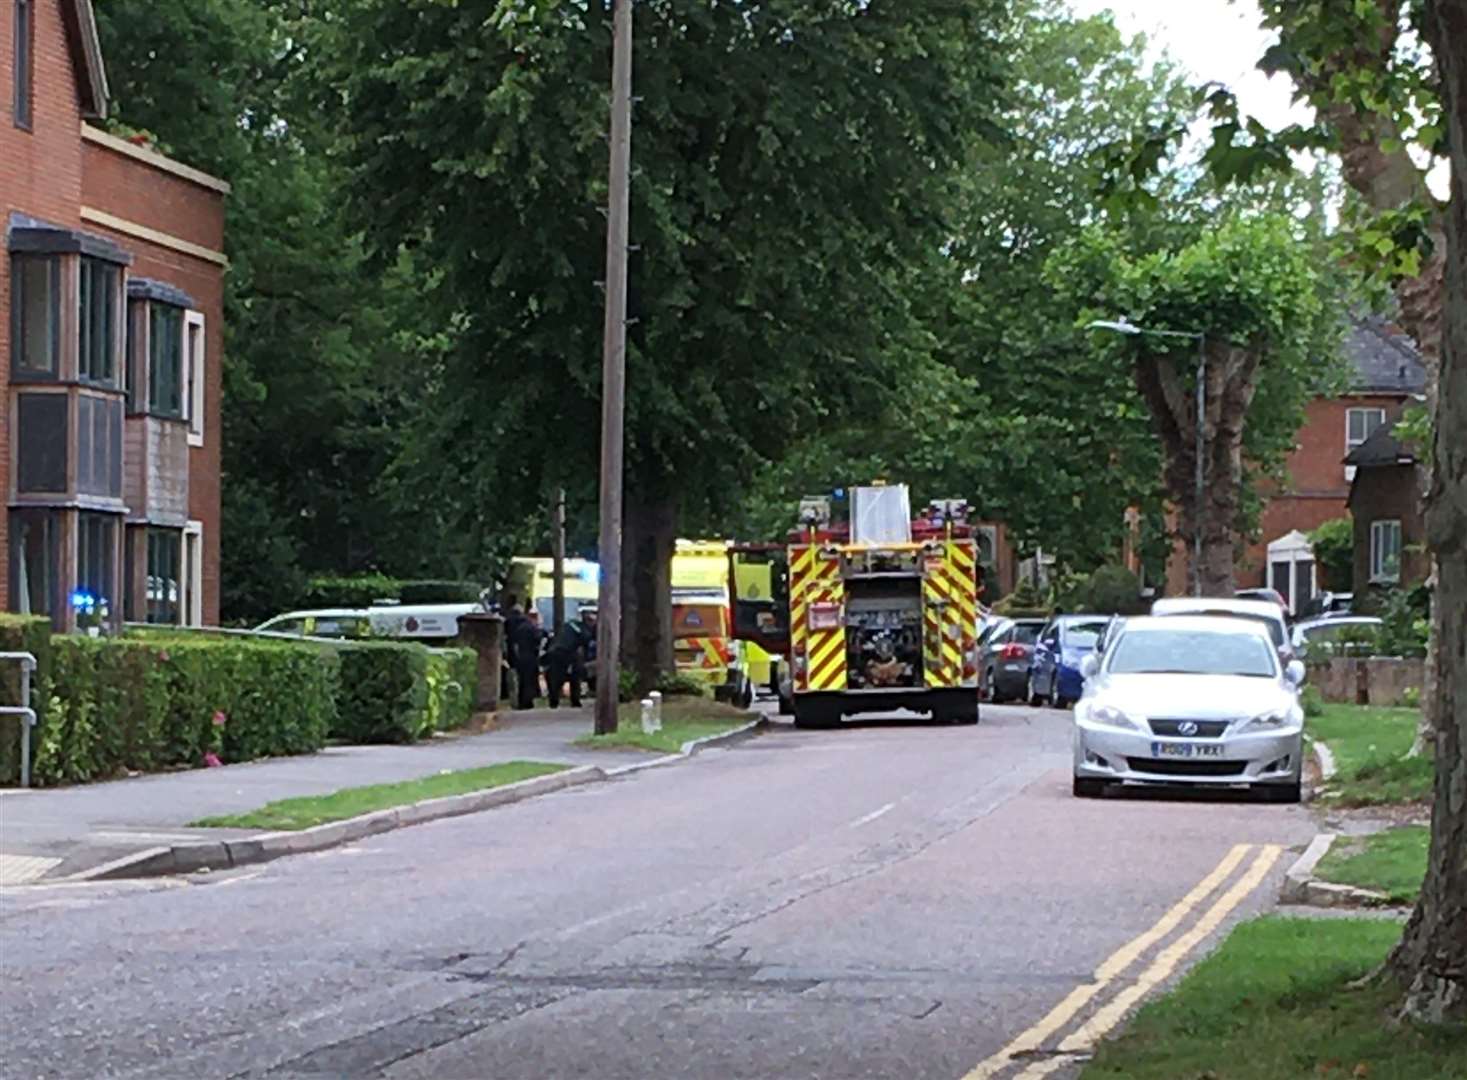 Emergency services at the scene in Oaks Road. Photo: Louisa Peachey